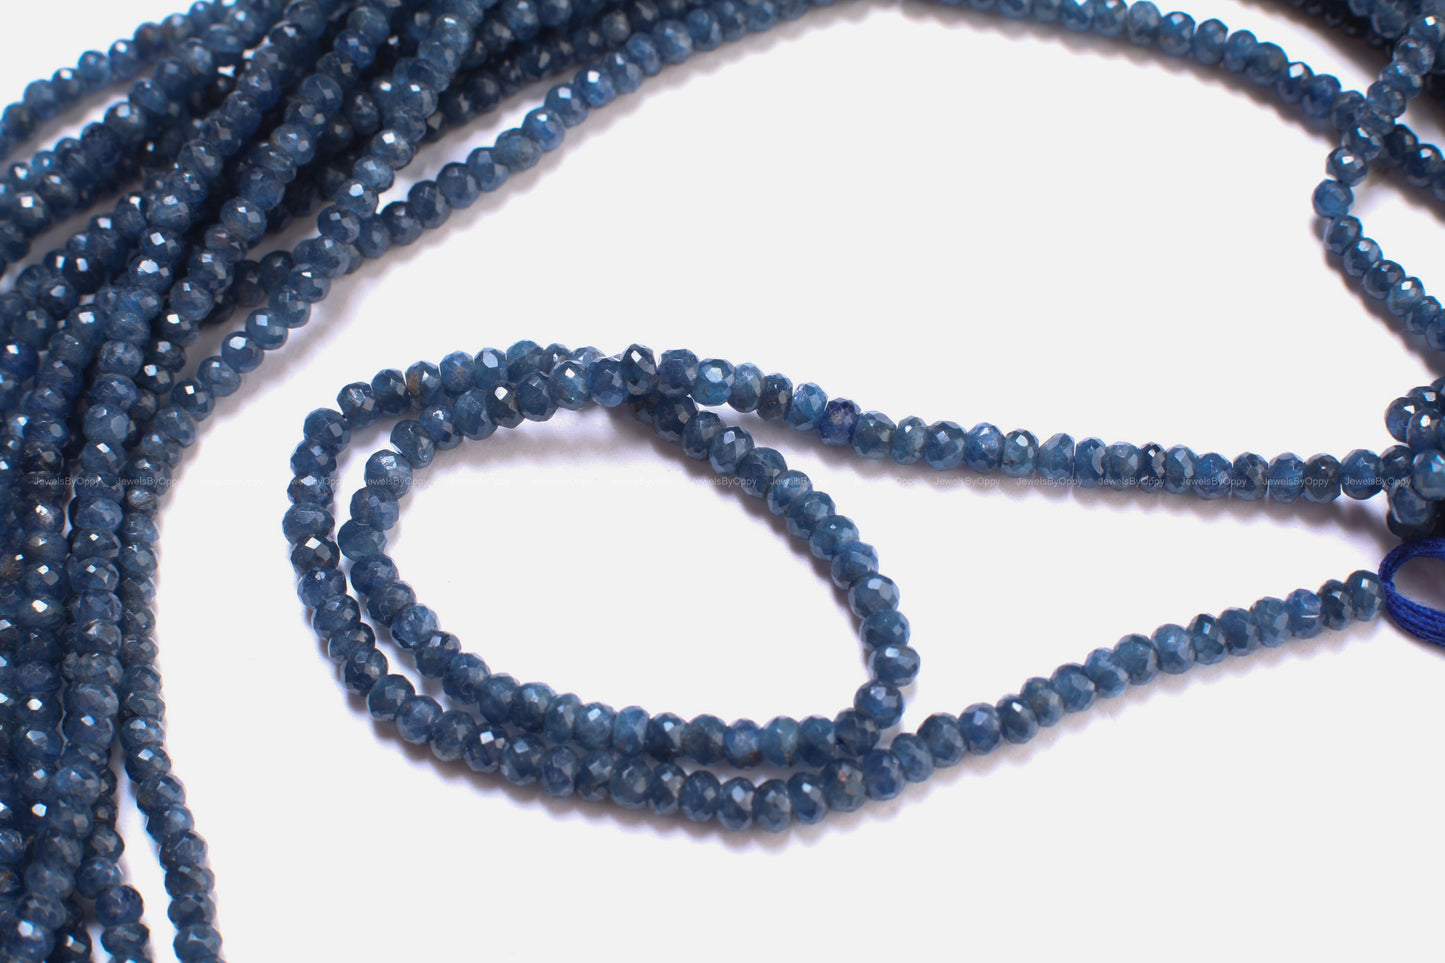 Natural Sapphire Faceted Rondelle, 4.5-5mm Light Blue Burma Sapphire DIY Jewelry Making Gemstone Necklace, Bracelet 14" Strand